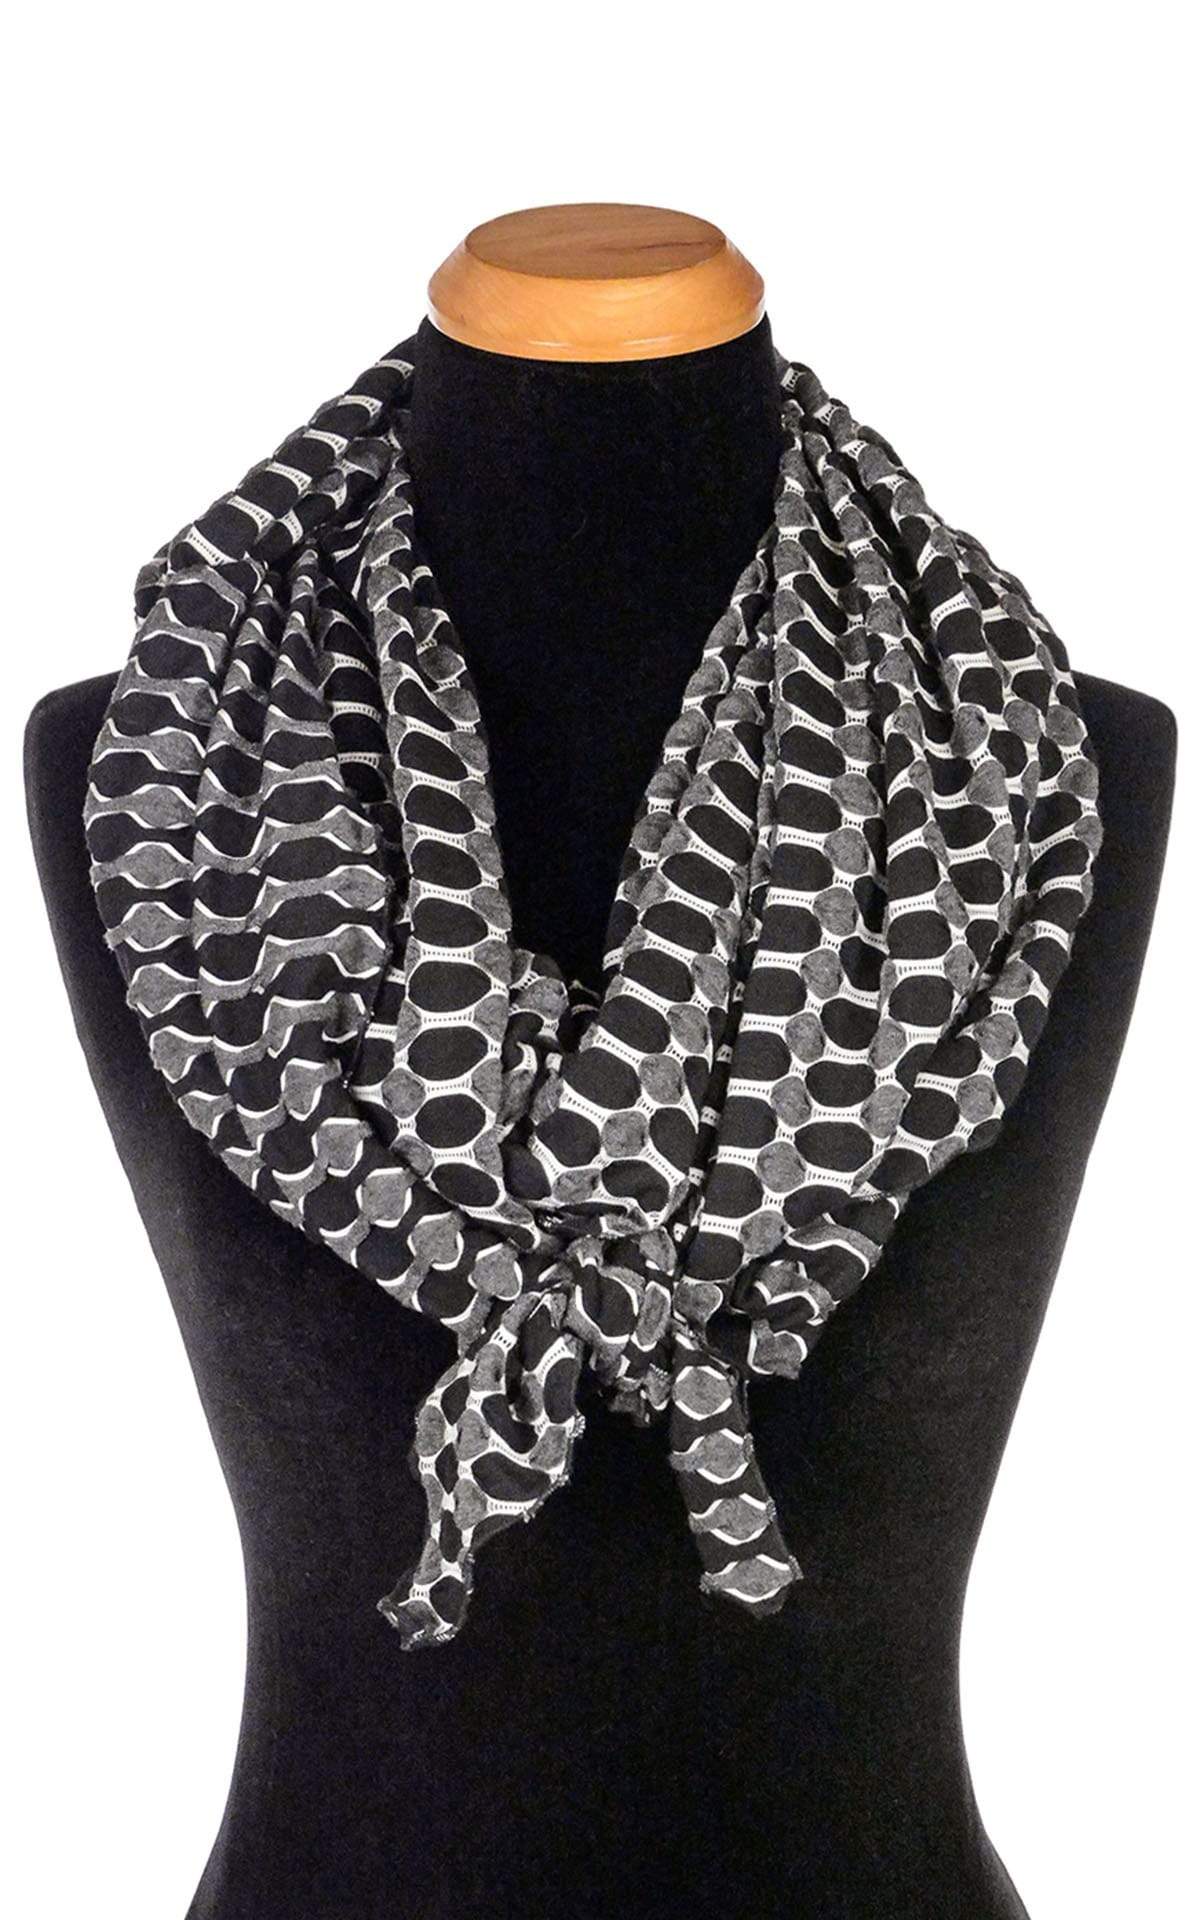 Women’s  Large Handkerchief Scarf, Wrap on Mannequin shown tied in fornt | Lunar and Solar Eclipse, black knit with white lattice patterning exposing sections of gray and white| Handmade in Seattle WA | Pandemonium Millinery